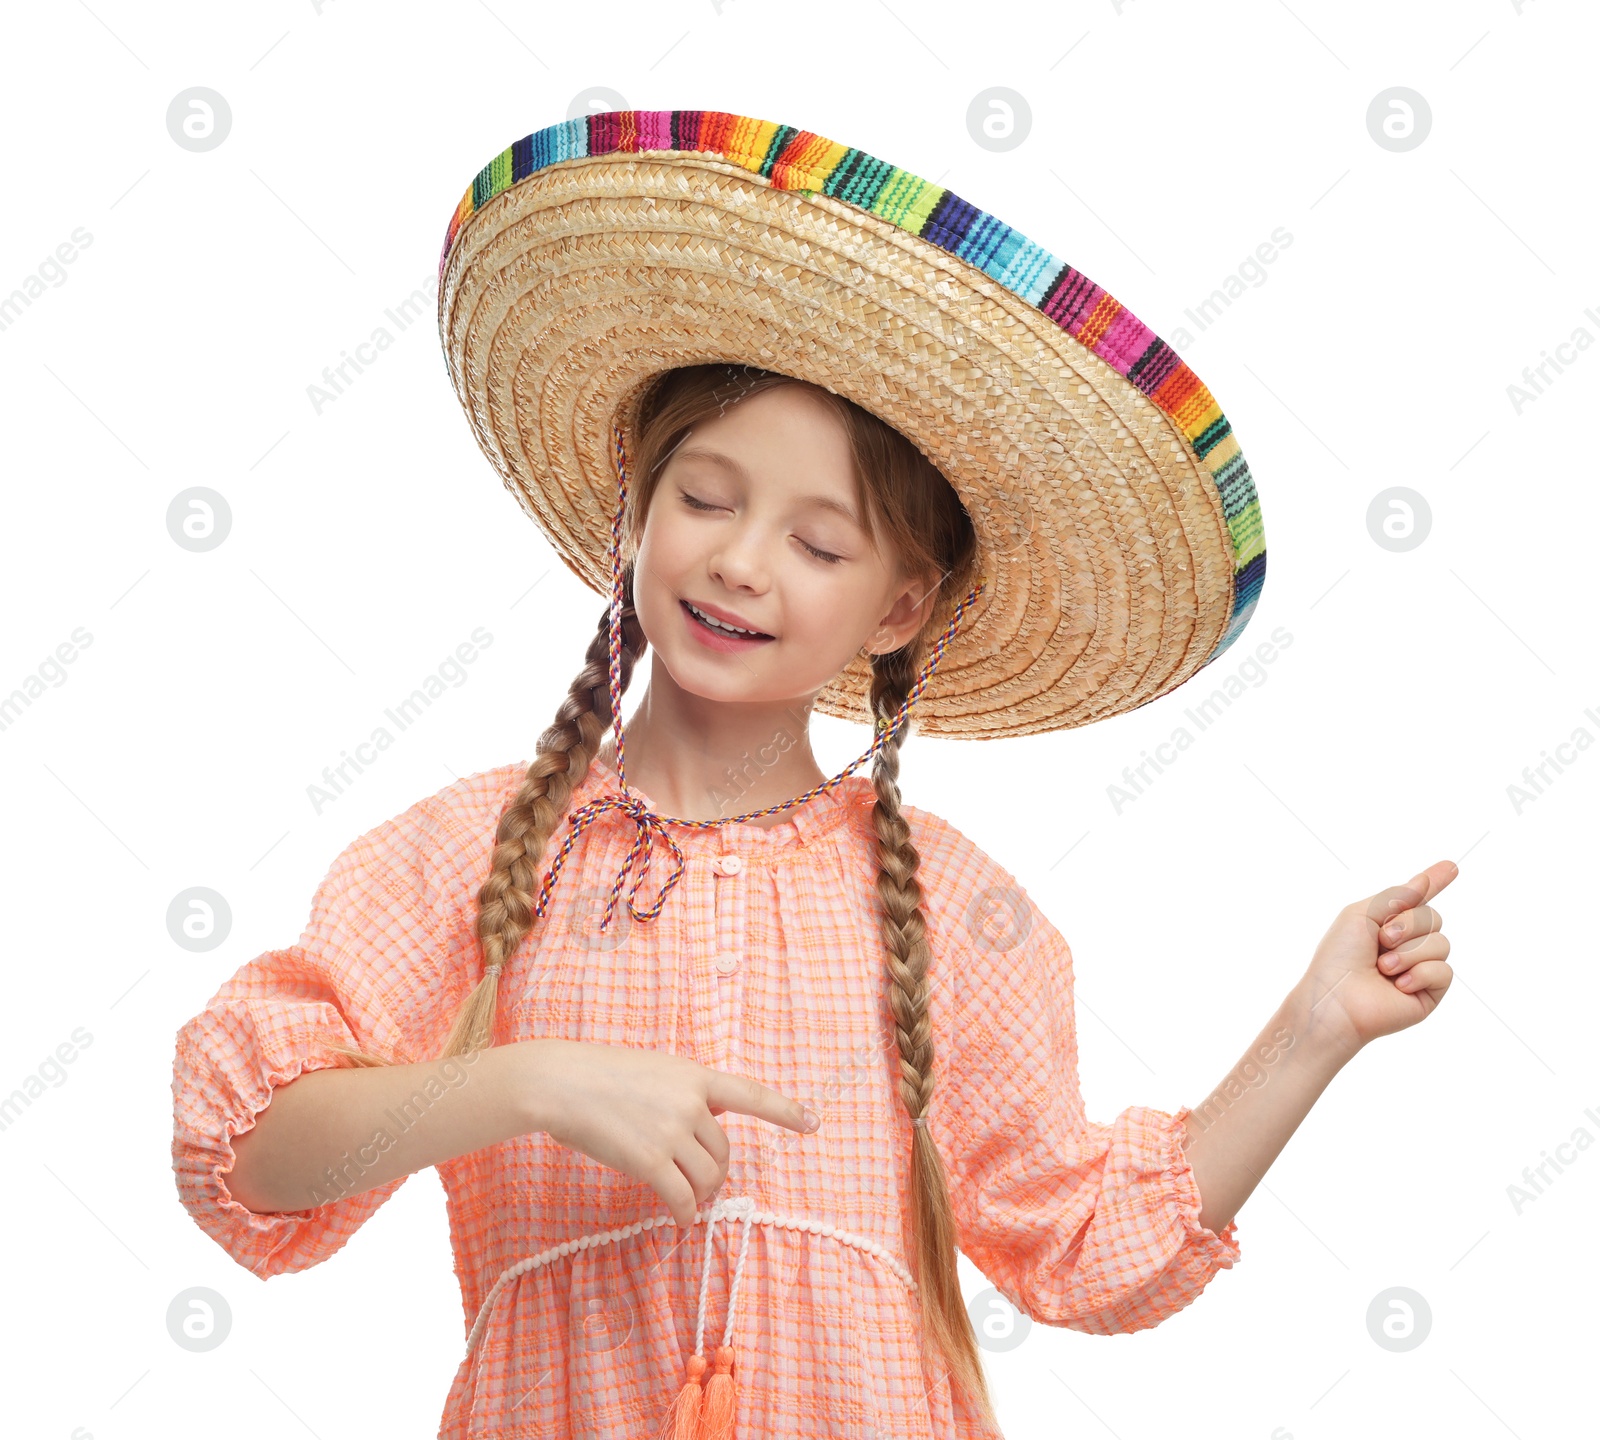 Photo of Cute girl in Mexican sombrero hat dancing on white background